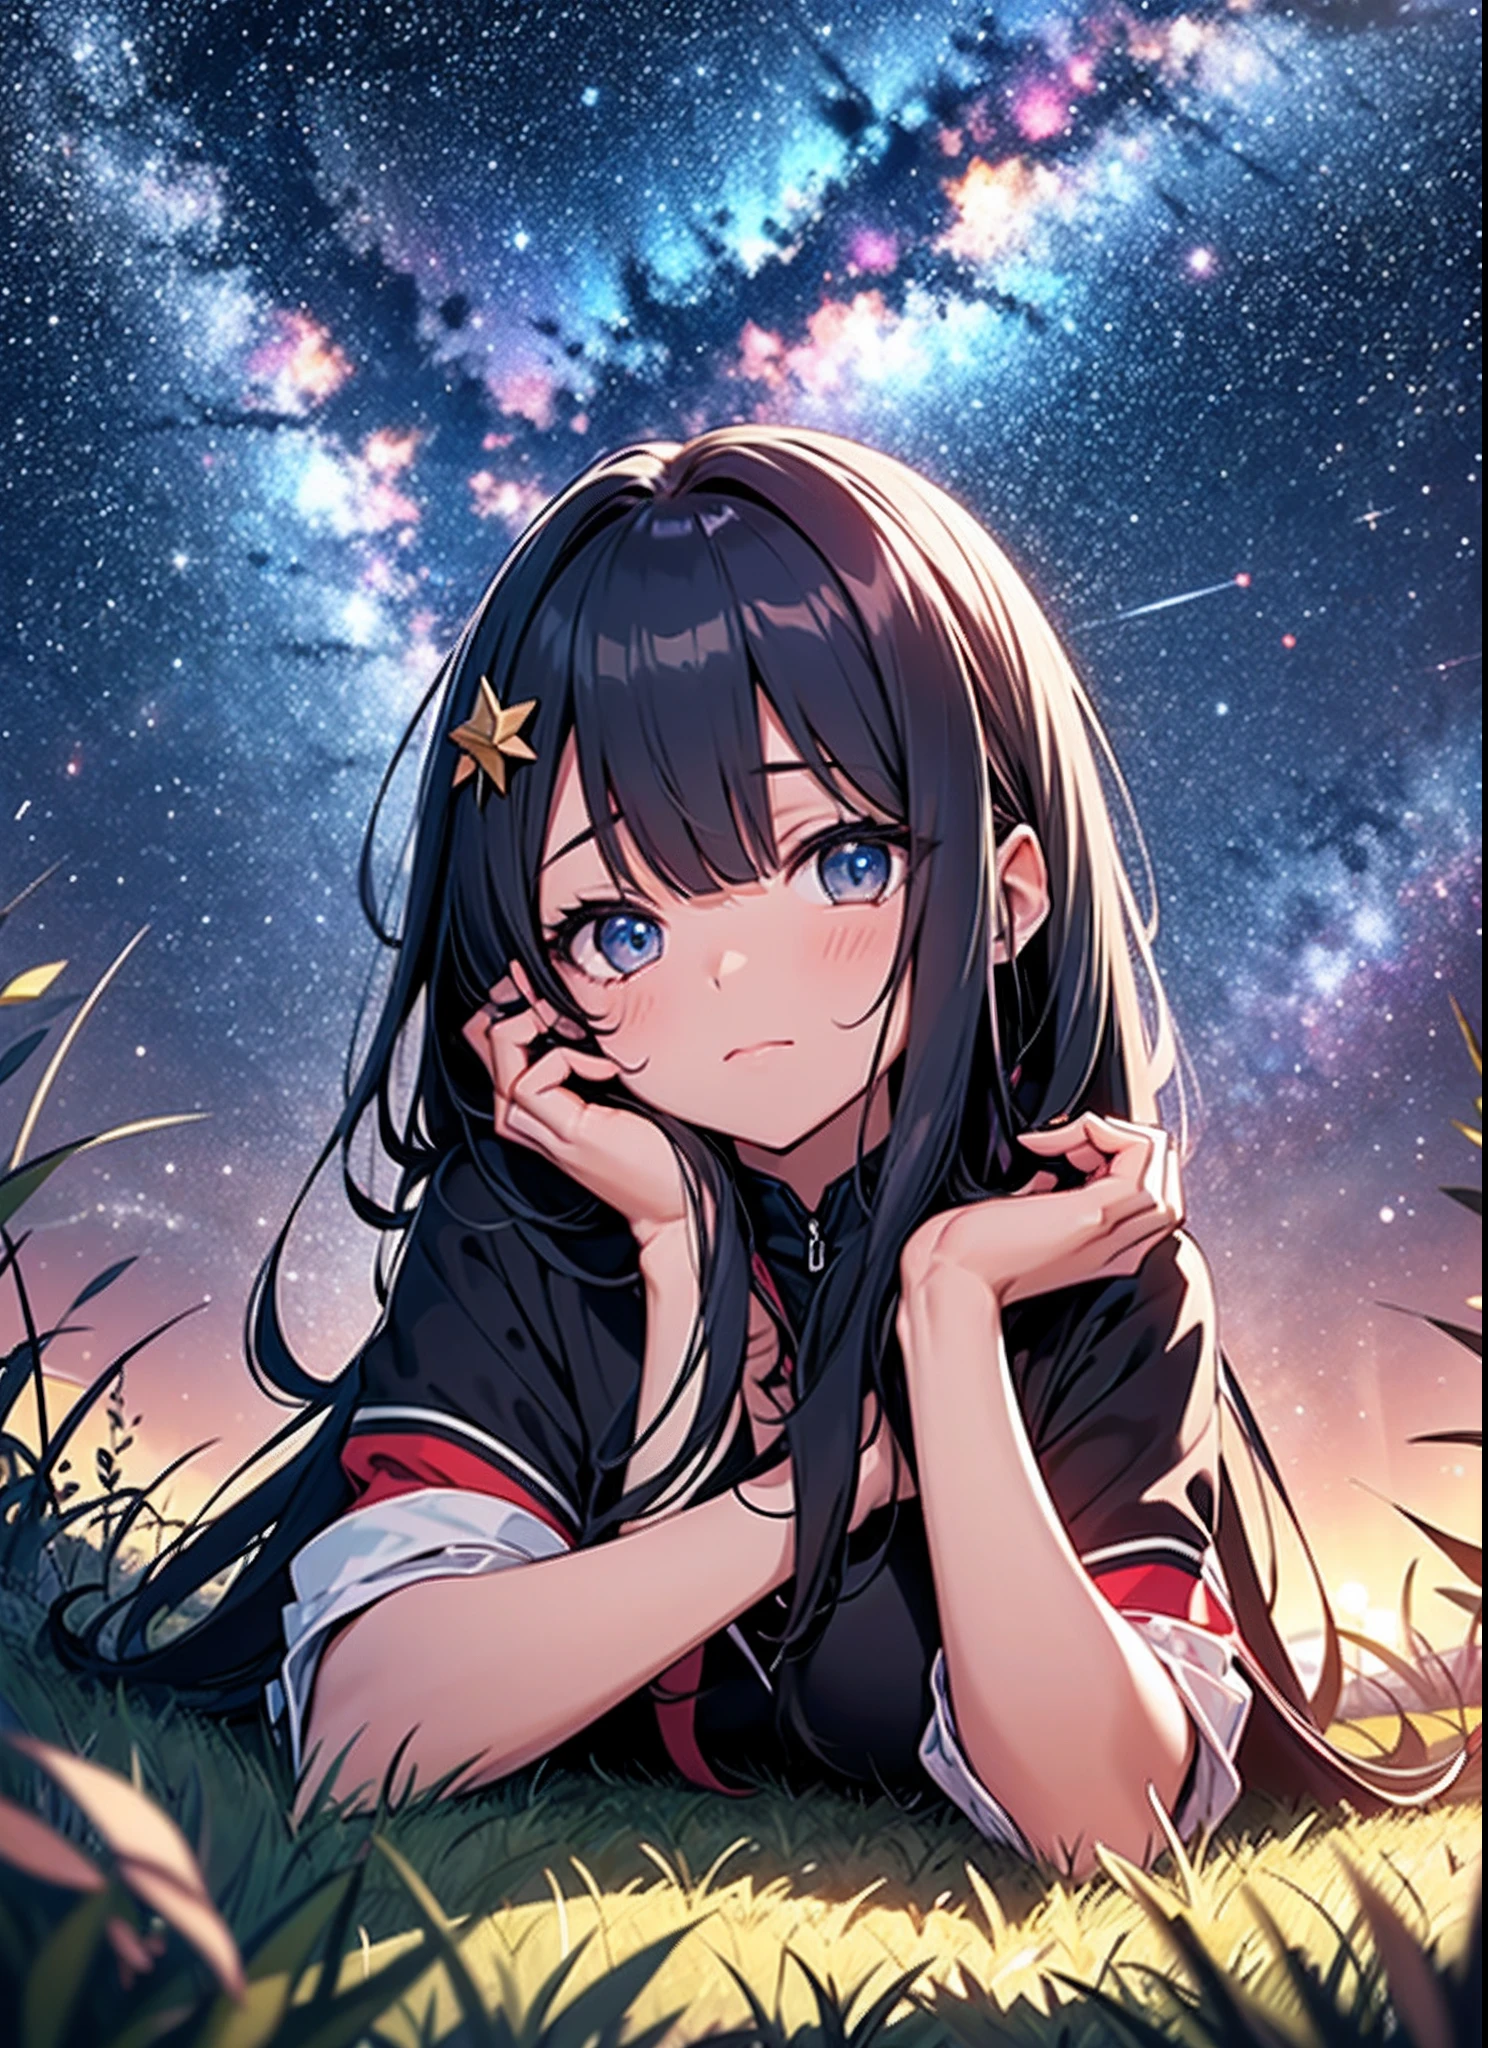 Describe a scene where a cute girl character is lying on a grassy hill, Looking up at the starry sky. Let her be surrounded by colorful nebulae and her favorite constellations.